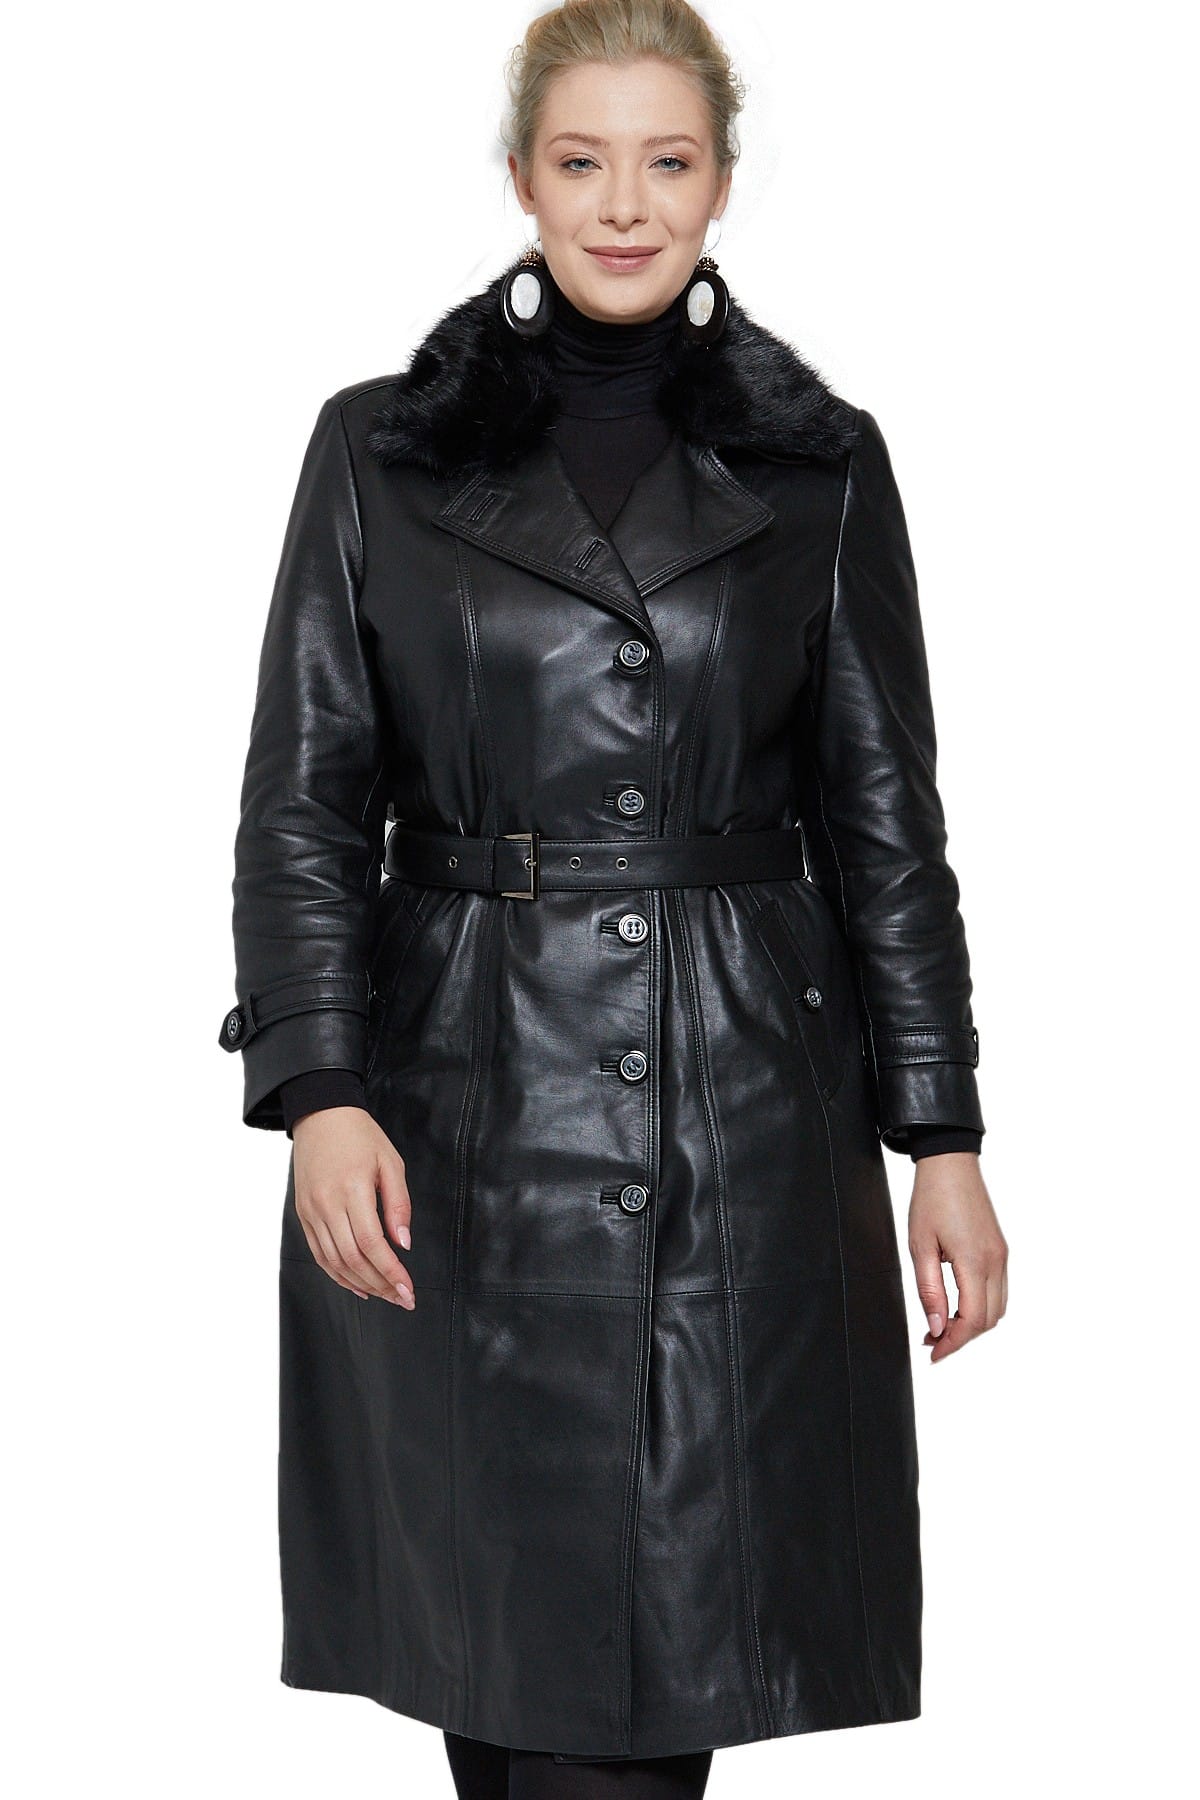 fur collar womens long leather trench coat